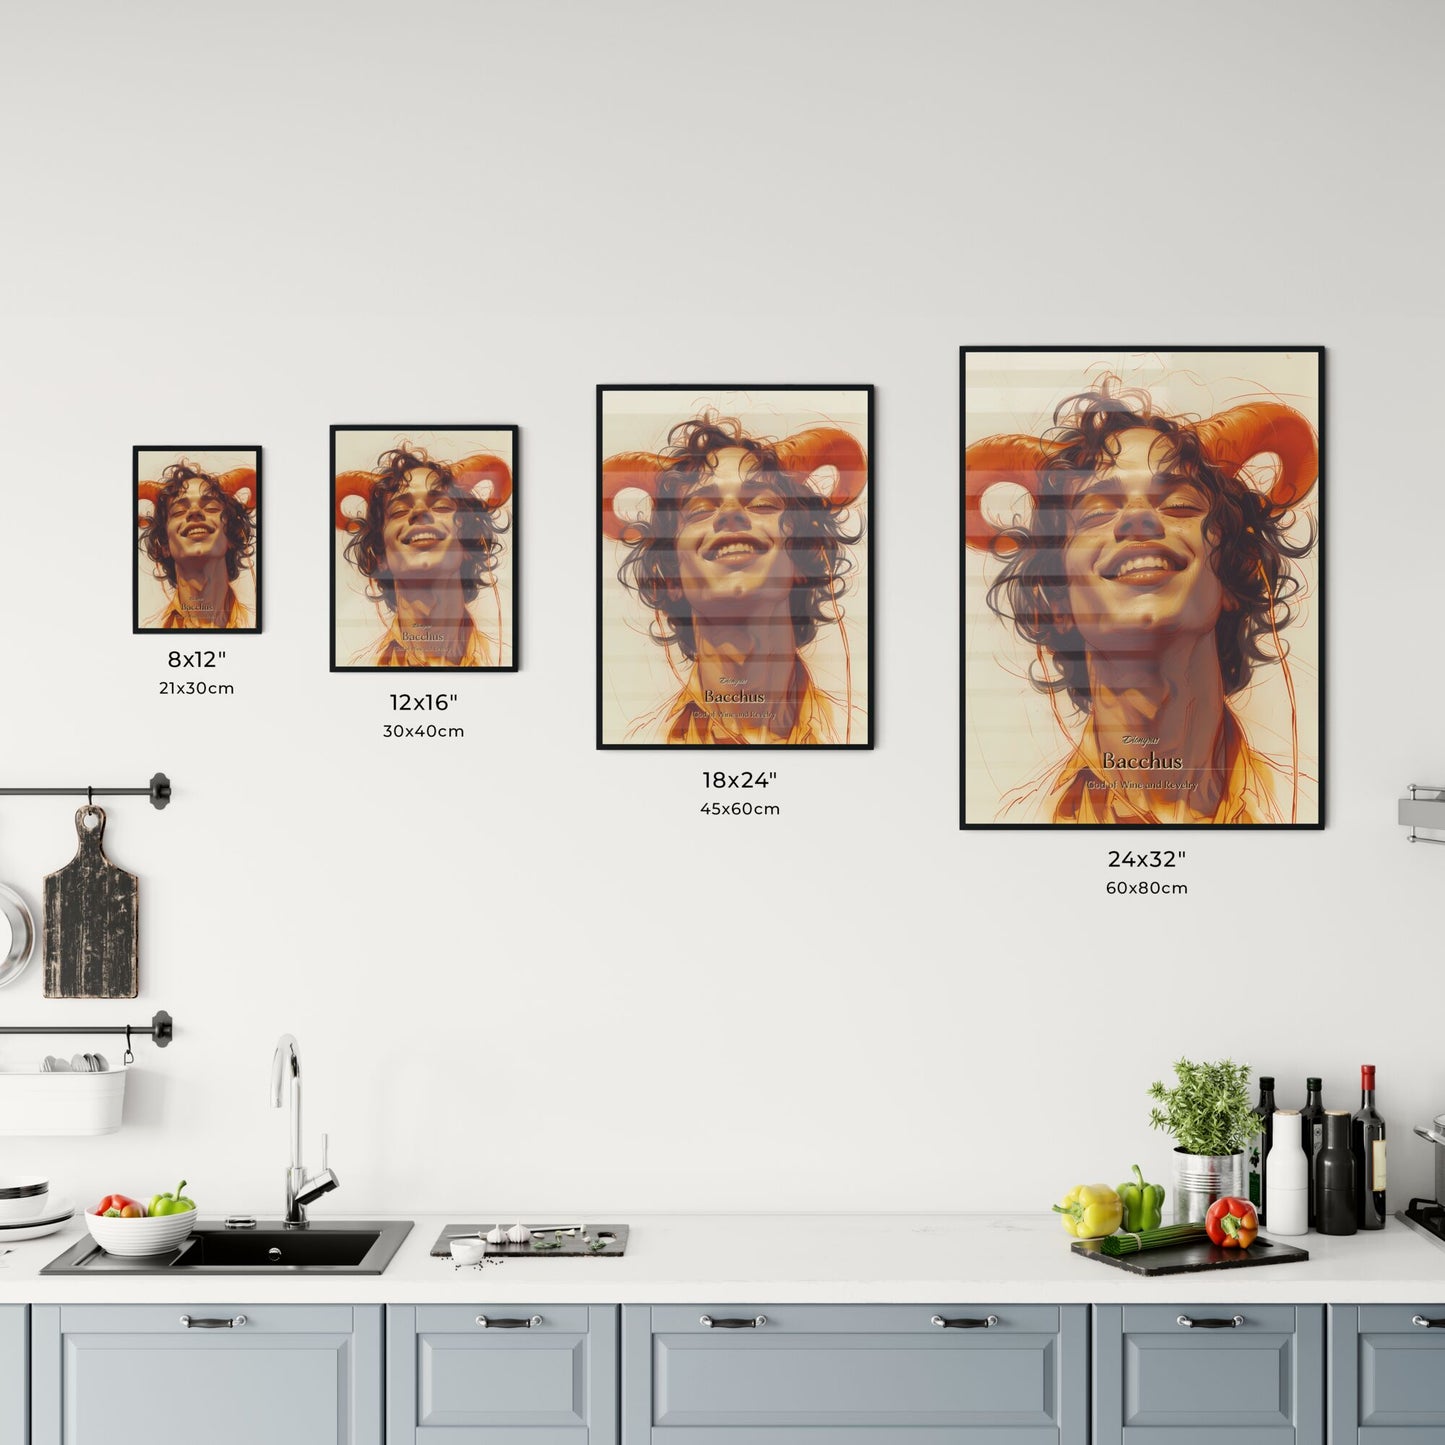 Dionysus, Bacchus, God of Wine and Revelry, A Poster of a man with horns on his head Default Title